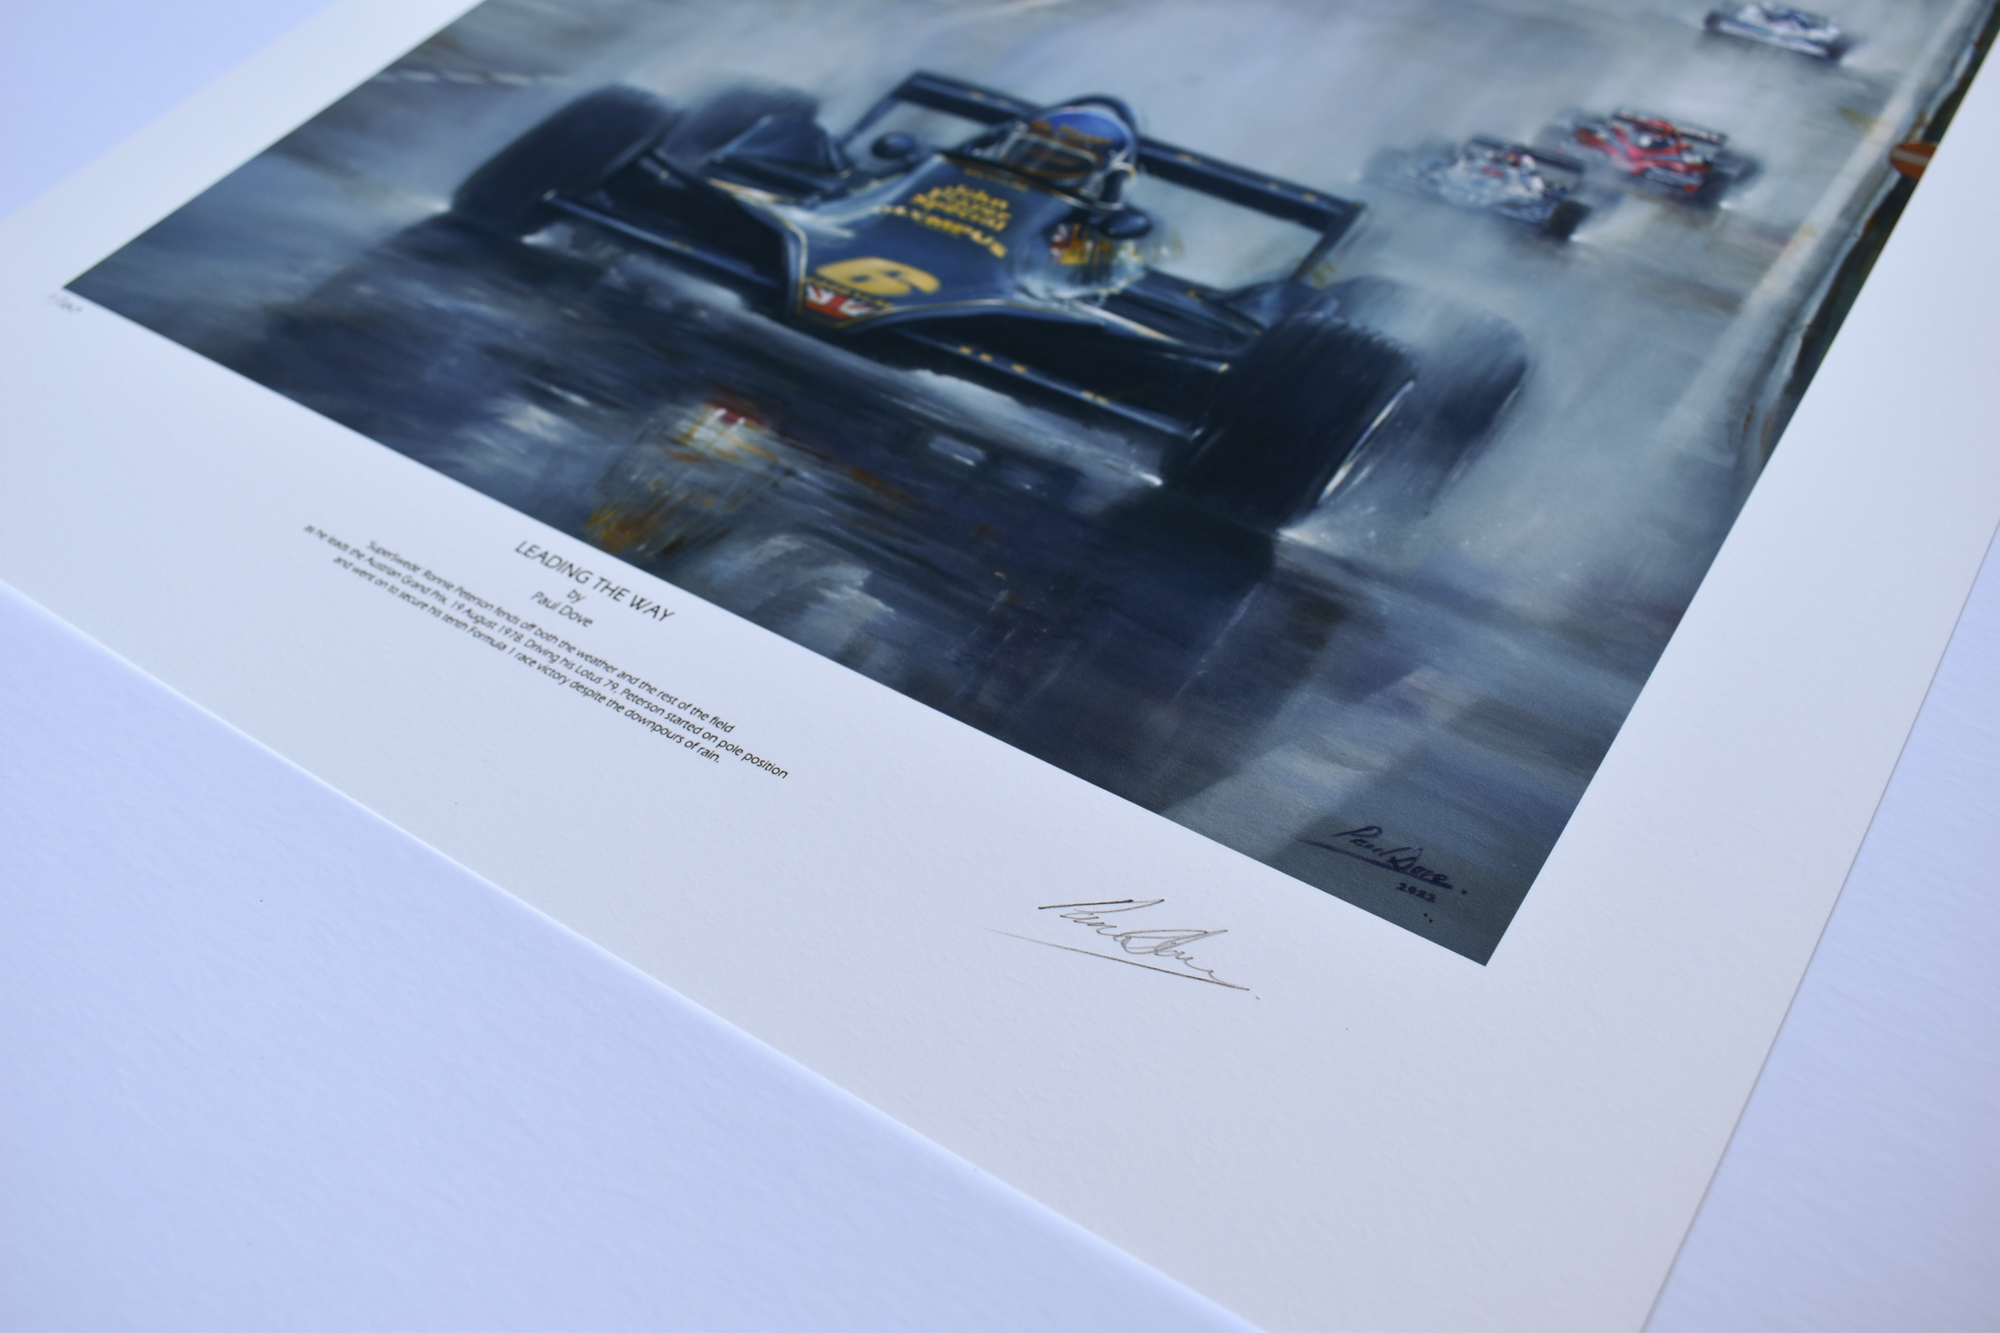 LEADING THE WAY – Ronnie Peterson Tribute – Limited Edition Print by Paul Dove